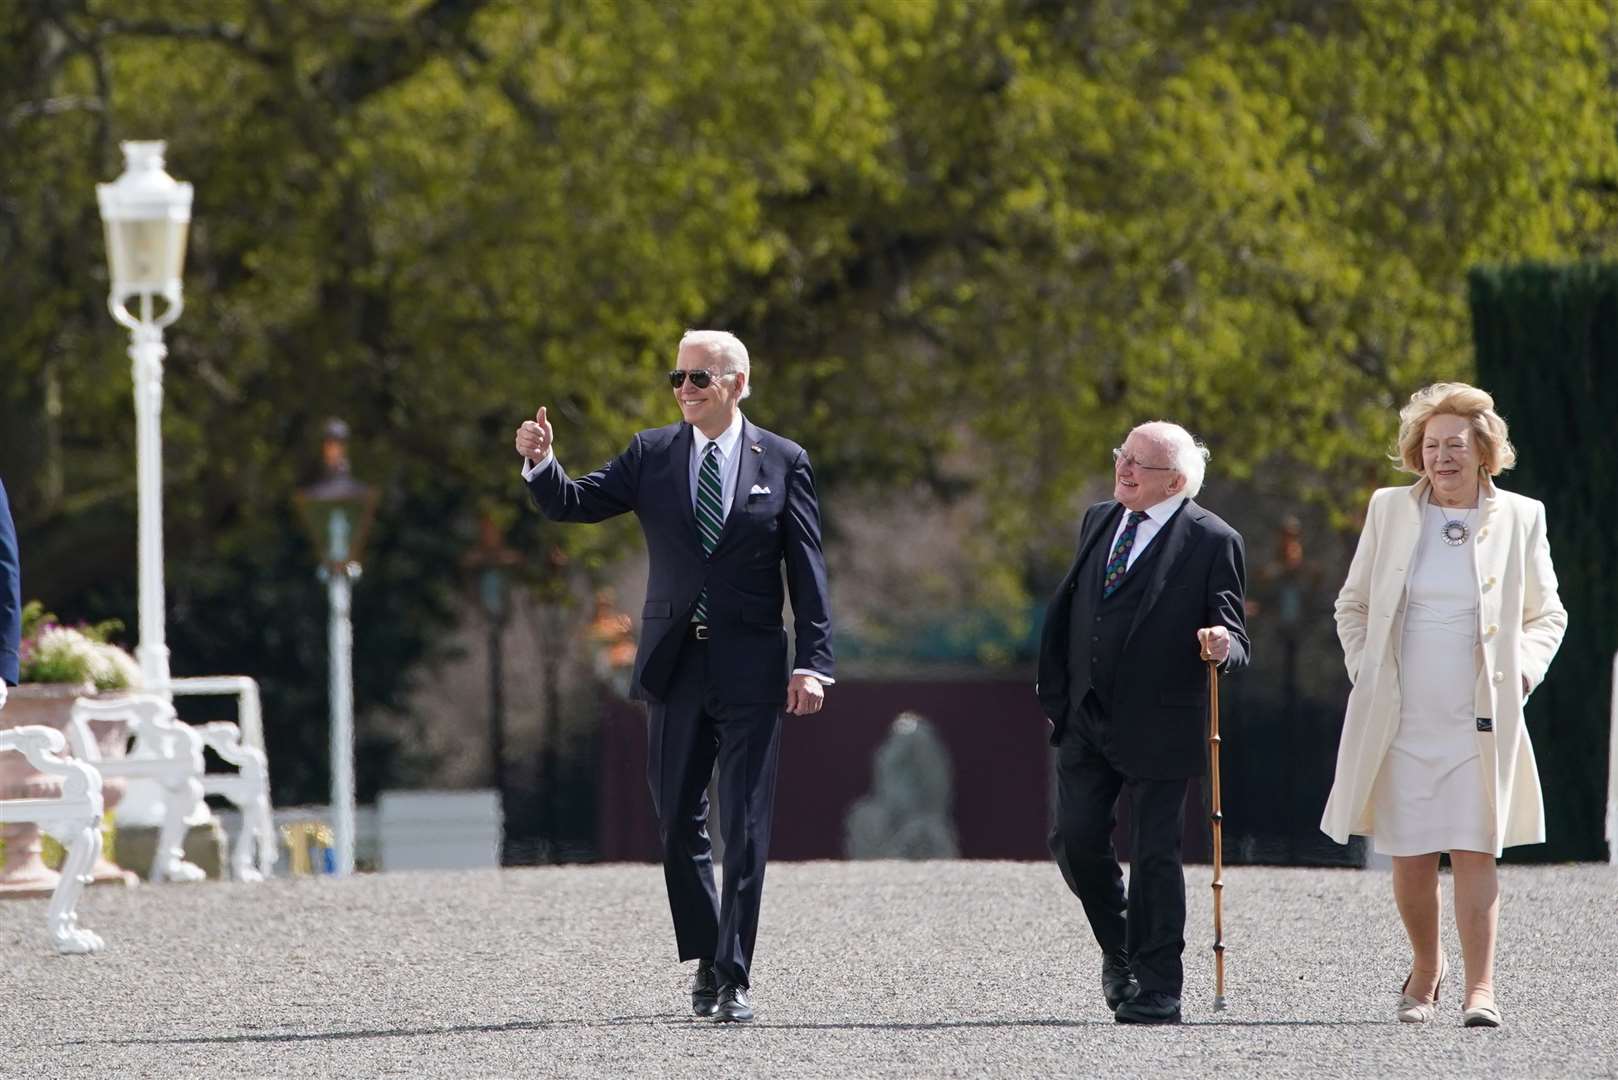 Joe Biden waves to onlookers as he takes a stroll in Phoenix Park with Michael D Higgins and his wife Sabina (Brian Lawless/PA)